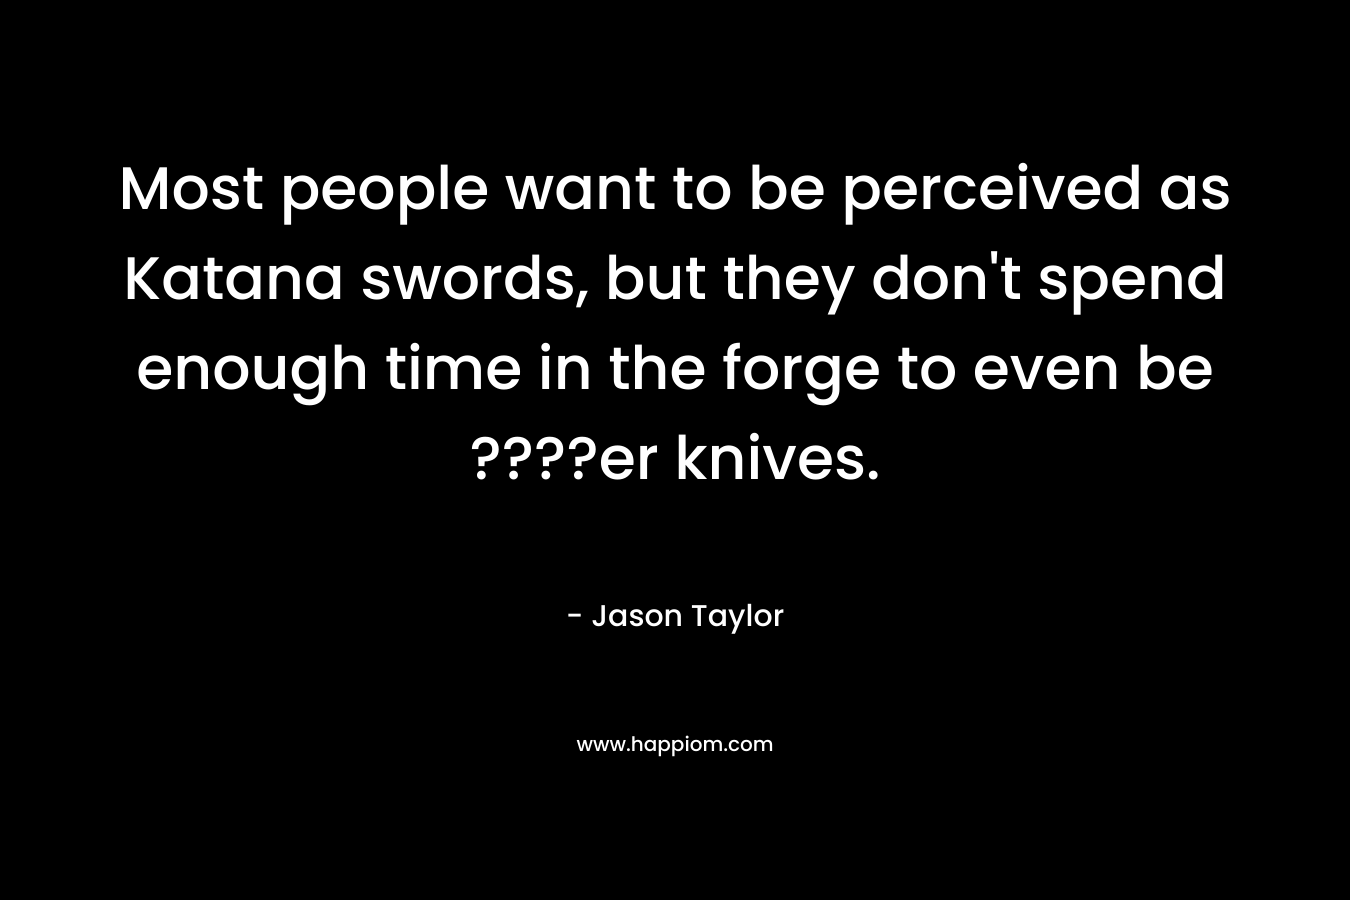 Most people want to be perceived as Katana swords, but they don’t spend enough time in the forge to even be ????er knives. – Jason  Taylor